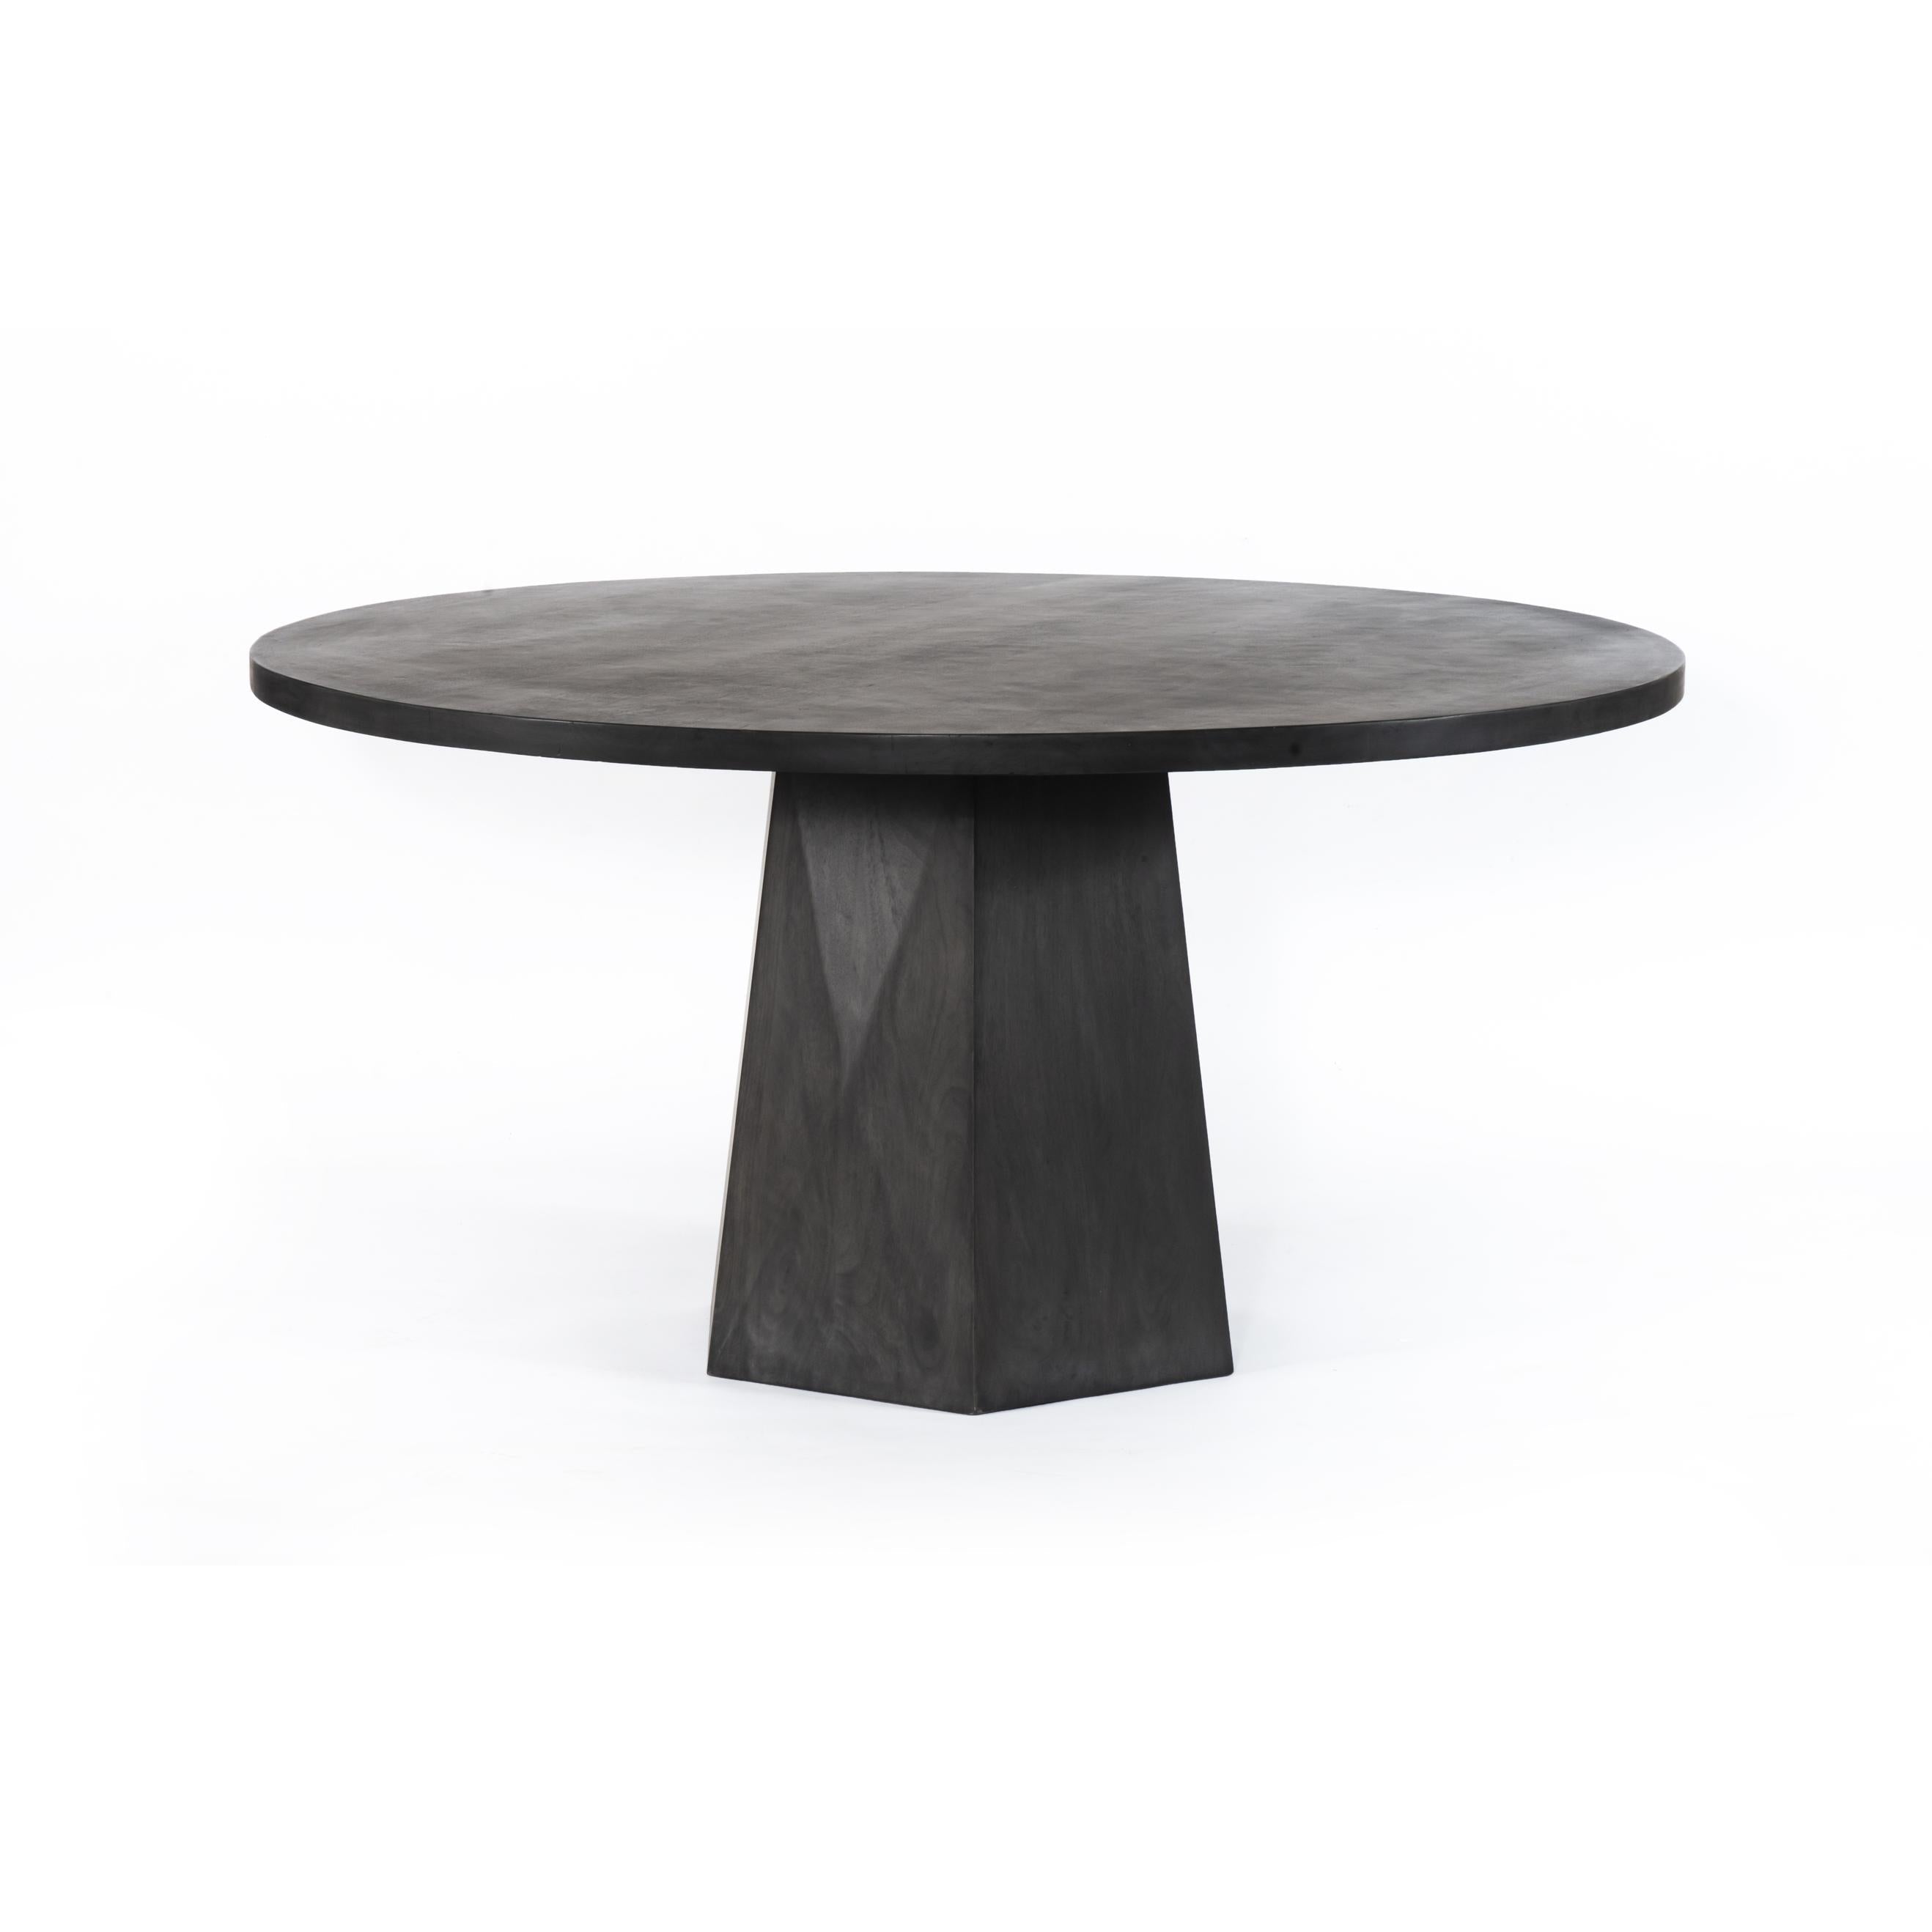 Kesling Round Dining Table